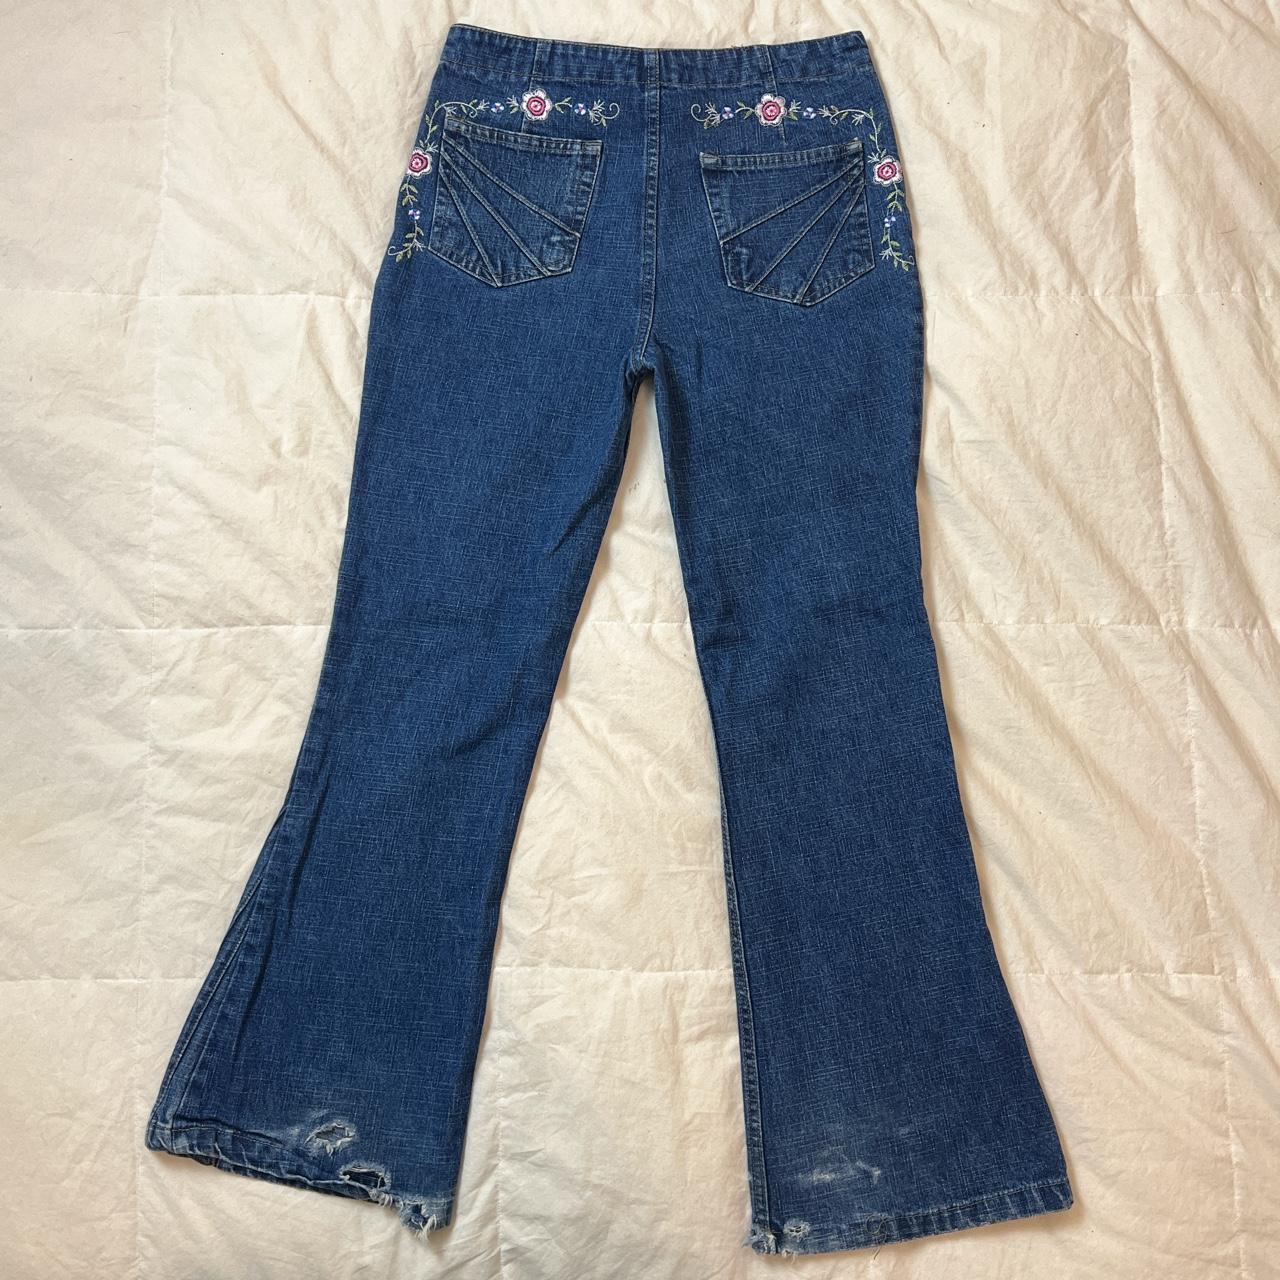 vintage early 2000s faded glory girl jeans •marked... - Depop